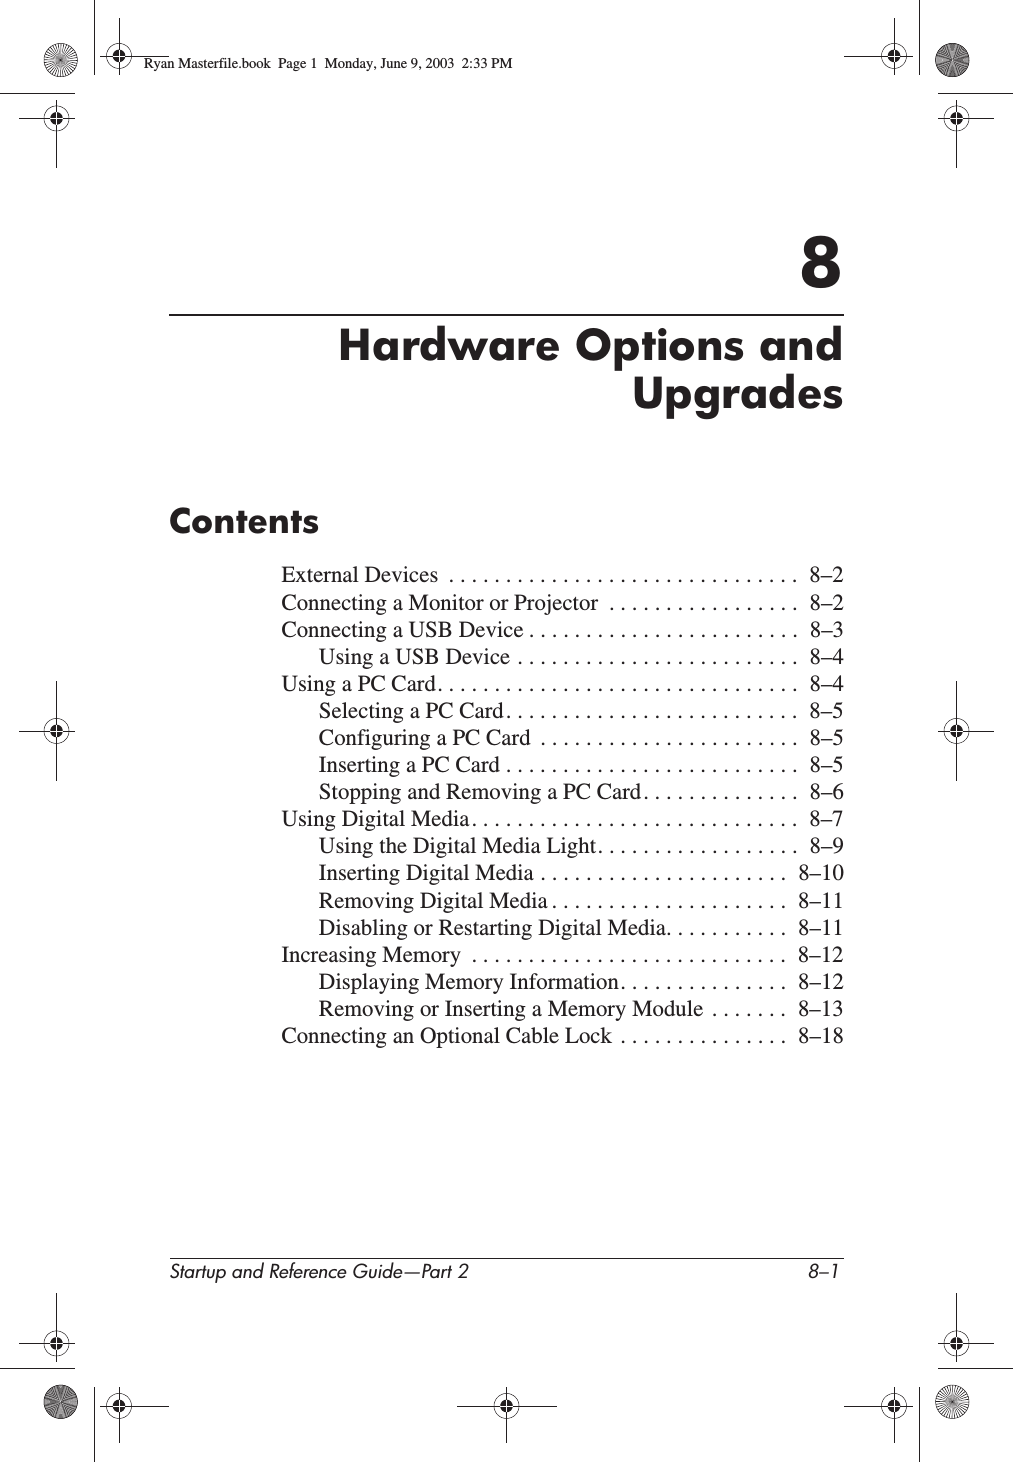 Startup and Reference Guide—Part 2 8–18Hardware Options andUpgradesContentsExternal Devices  . . . . . . . . . . . . . . . . . . . . . . . . . . . . . . .  8–2Connecting a Monitor or Projector  . . . . . . . . . . . . . . . . .  8–2Connecting a USB Device . . . . . . . . . . . . . . . . . . . . . . . .  8–3Using a USB Device . . . . . . . . . . . . . . . . . . . . . . . . .  8–4Using a PC Card. . . . . . . . . . . . . . . . . . . . . . . . . . . . . . . .  8–4Selecting a PC Card. . . . . . . . . . . . . . . . . . . . . . . . . .  8–5Configuring a PC Card  . . . . . . . . . . . . . . . . . . . . . . .  8–5Inserting a PC Card . . . . . . . . . . . . . . . . . . . . . . . . . .  8–5Stopping and Removing a PC Card. . . . . . . . . . . . . .  8–6Using Digital Media. . . . . . . . . . . . . . . . . . . . . . . . . . . . .  8–7Using the Digital Media Light. . . . . . . . . . . . . . . . . .  8–9Inserting Digital Media . . . . . . . . . . . . . . . . . . . . . .  8–10Removing Digital Media . . . . . . . . . . . . . . . . . . . . .  8–11Disabling or Restarting Digital Media. . . . . . . . . . .  8–11Increasing Memory  . . . . . . . . . . . . . . . . . . . . . . . . . . . .  8–12Displaying Memory Information. . . . . . . . . . . . . . .  8–12Removing or Inserting a Memory Module  . . . . . . .  8–13Connecting an Optional Cable Lock  . . . . . . . . . . . . . . .  8–18Ryan Masterfile.book  Page 1  Monday, June 9, 2003  2:33 PM